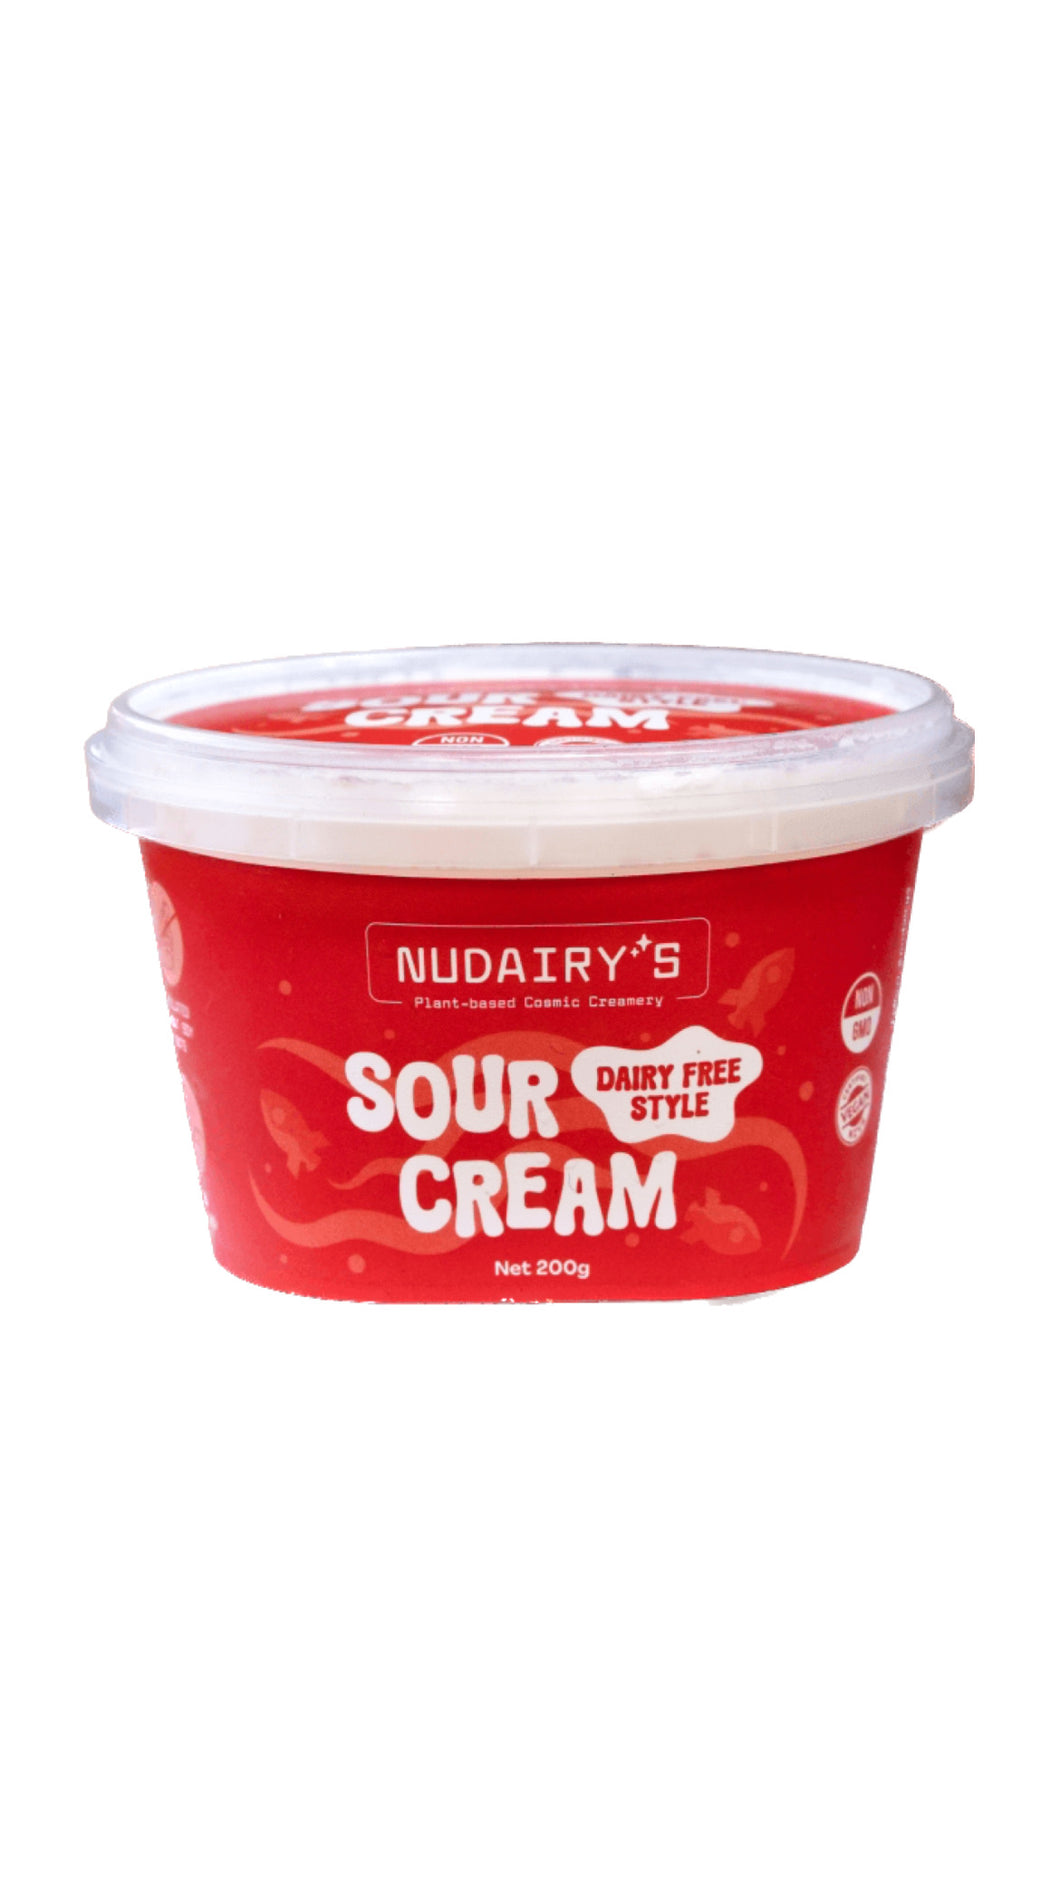 ** 15% OFF INTRODUCTORY OFFER ** Nudairy - Sour Cream 200g (COLD)